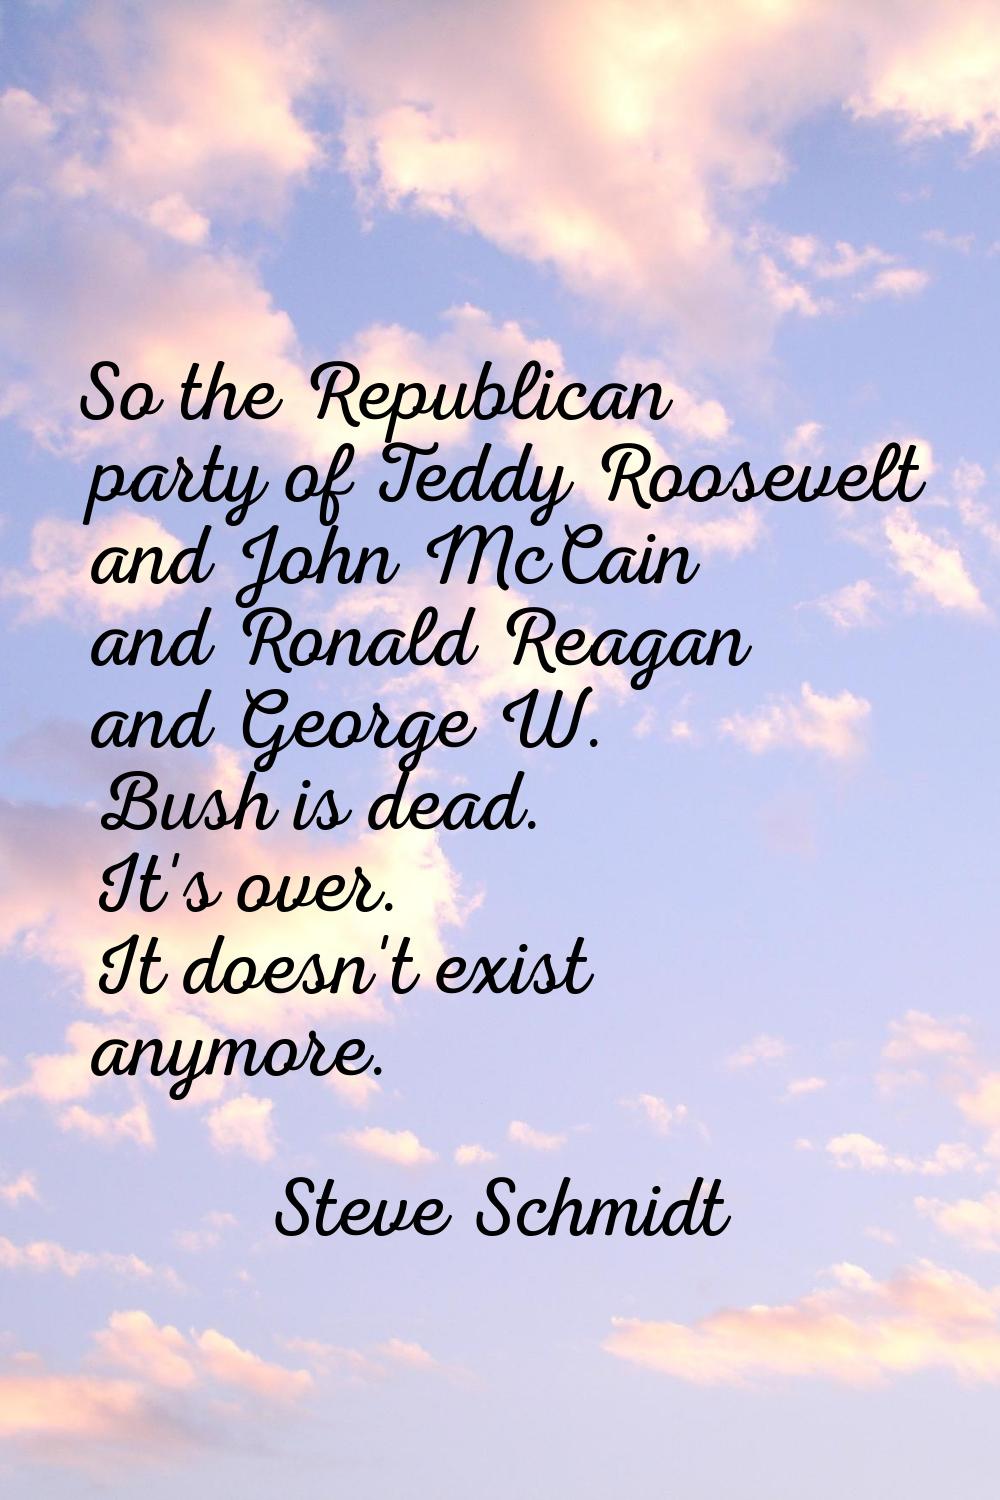 So the Republican party of Teddy Roosevelt and John McCain and Ronald Reagan and George W. Bush is 